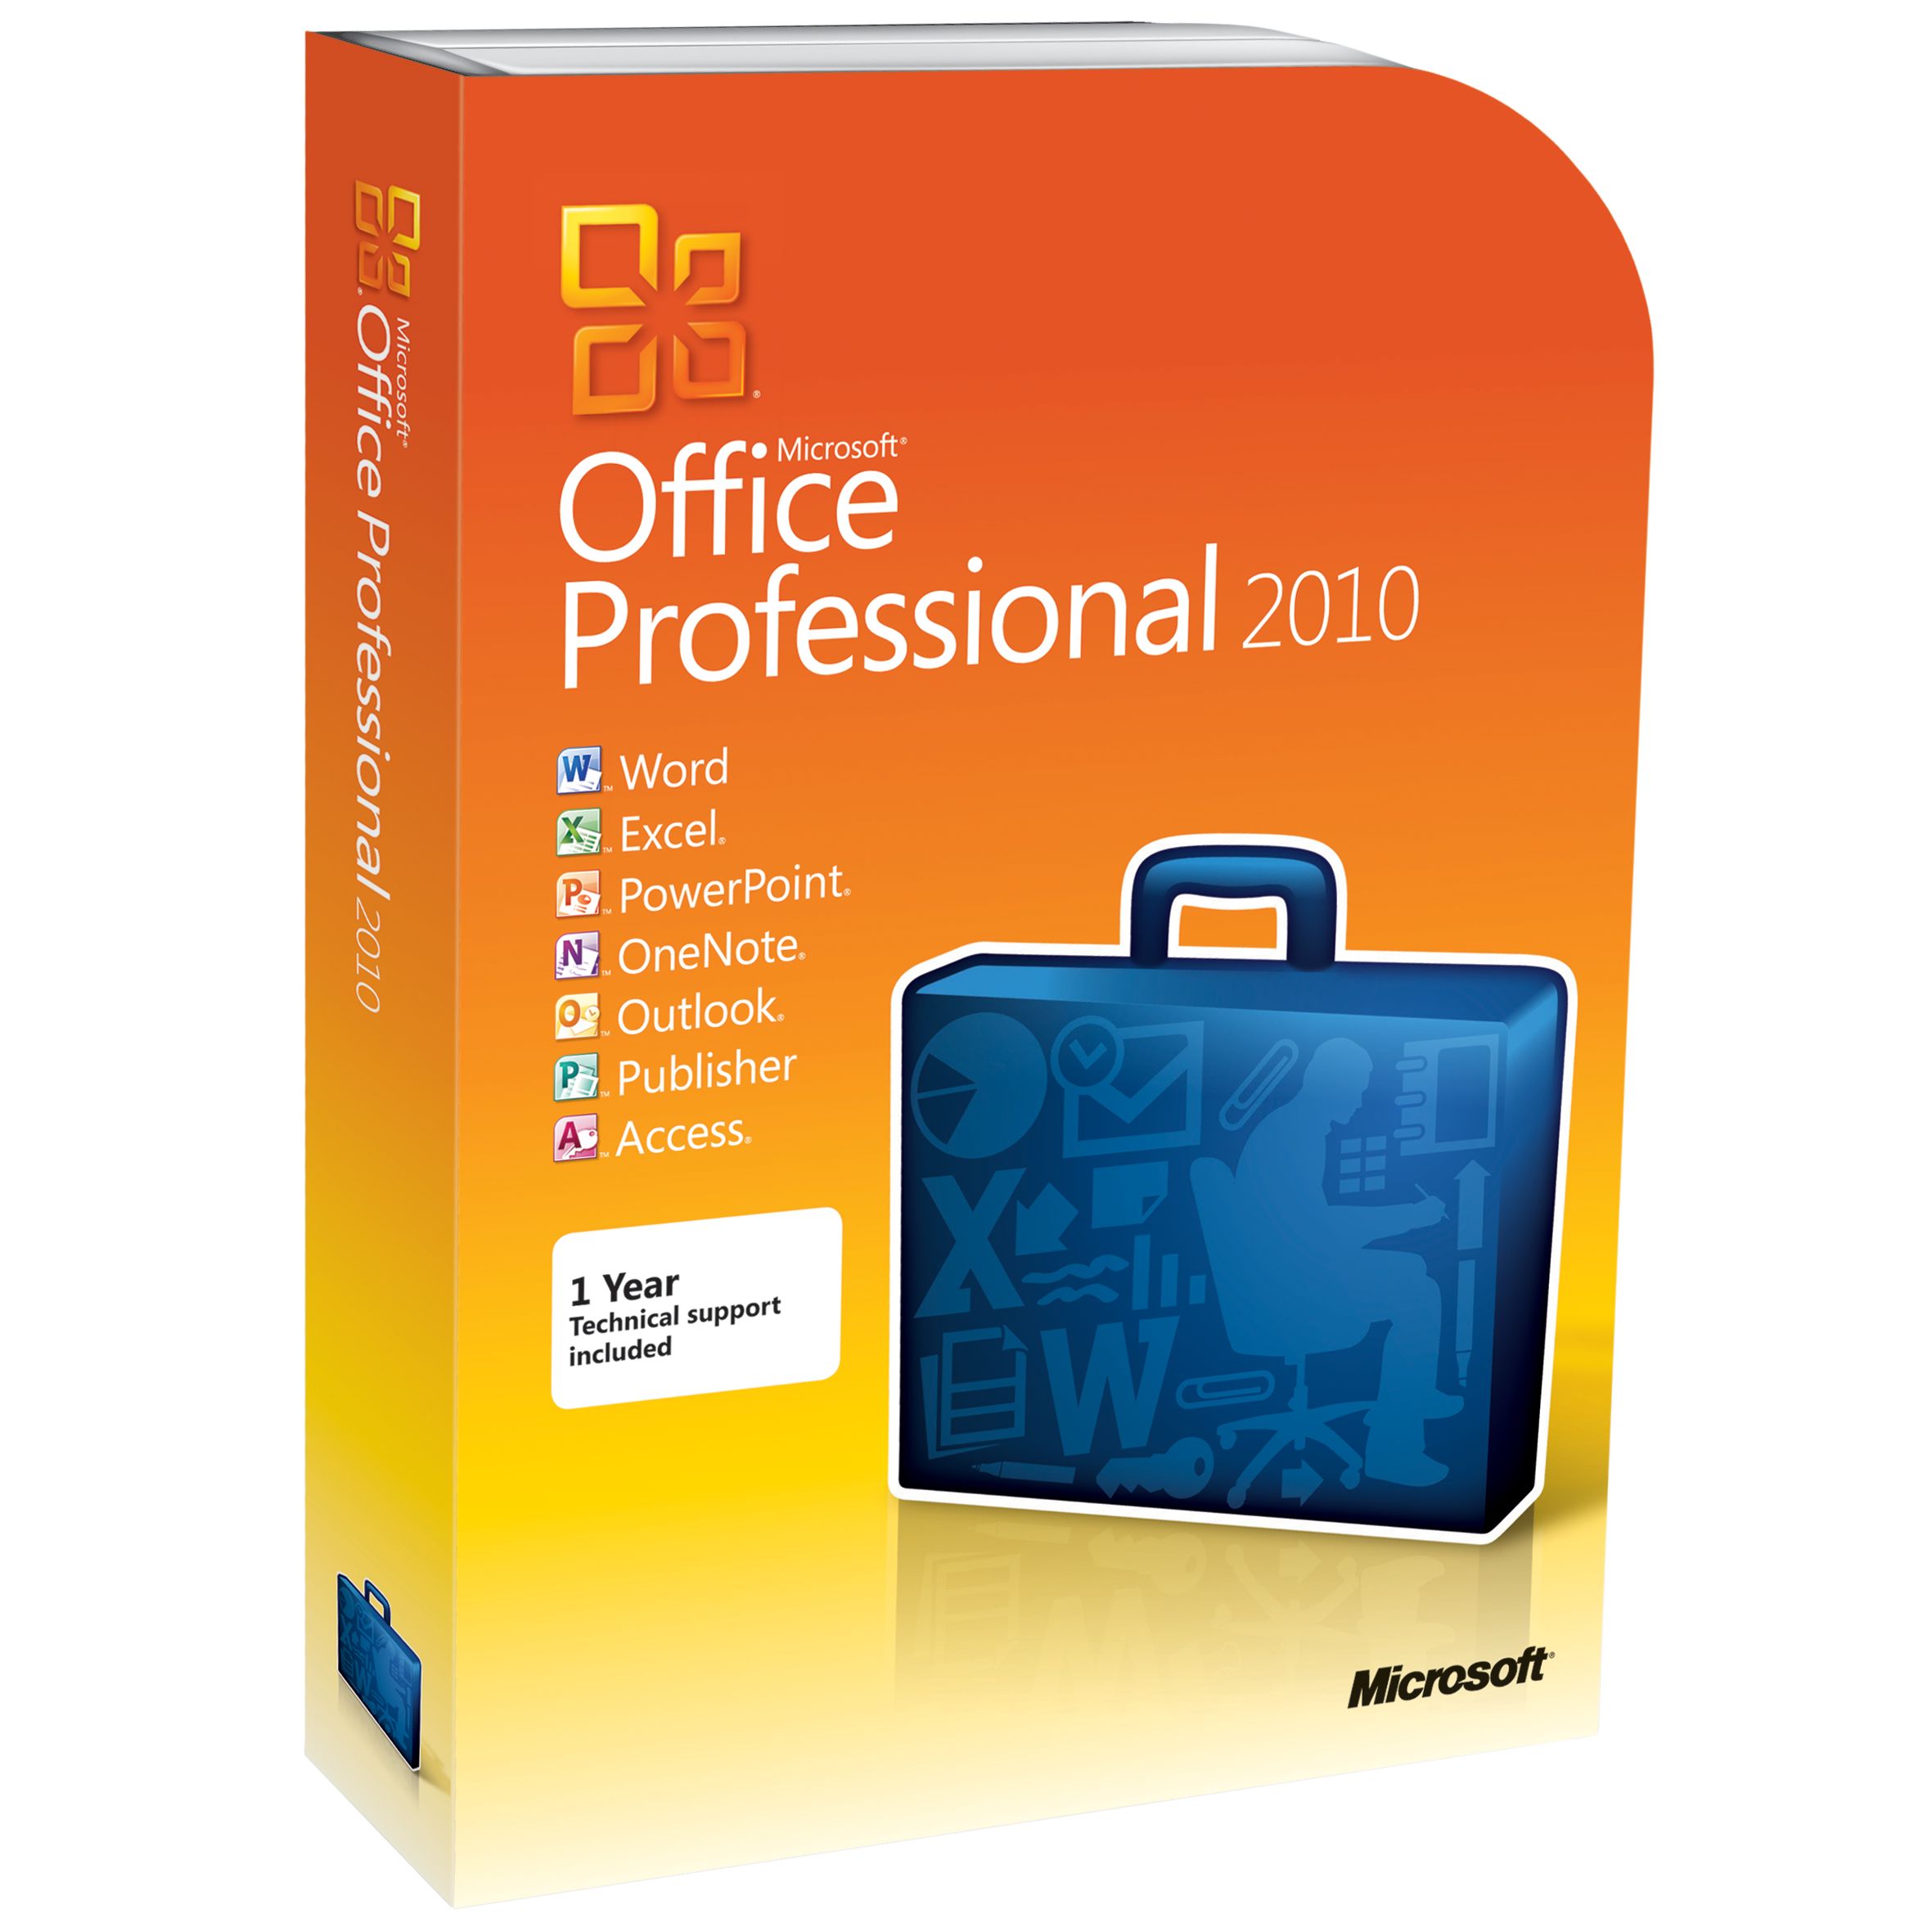 Microsoft Office 2010 Professional CD-ROM for PC, 1 User at John Lewis